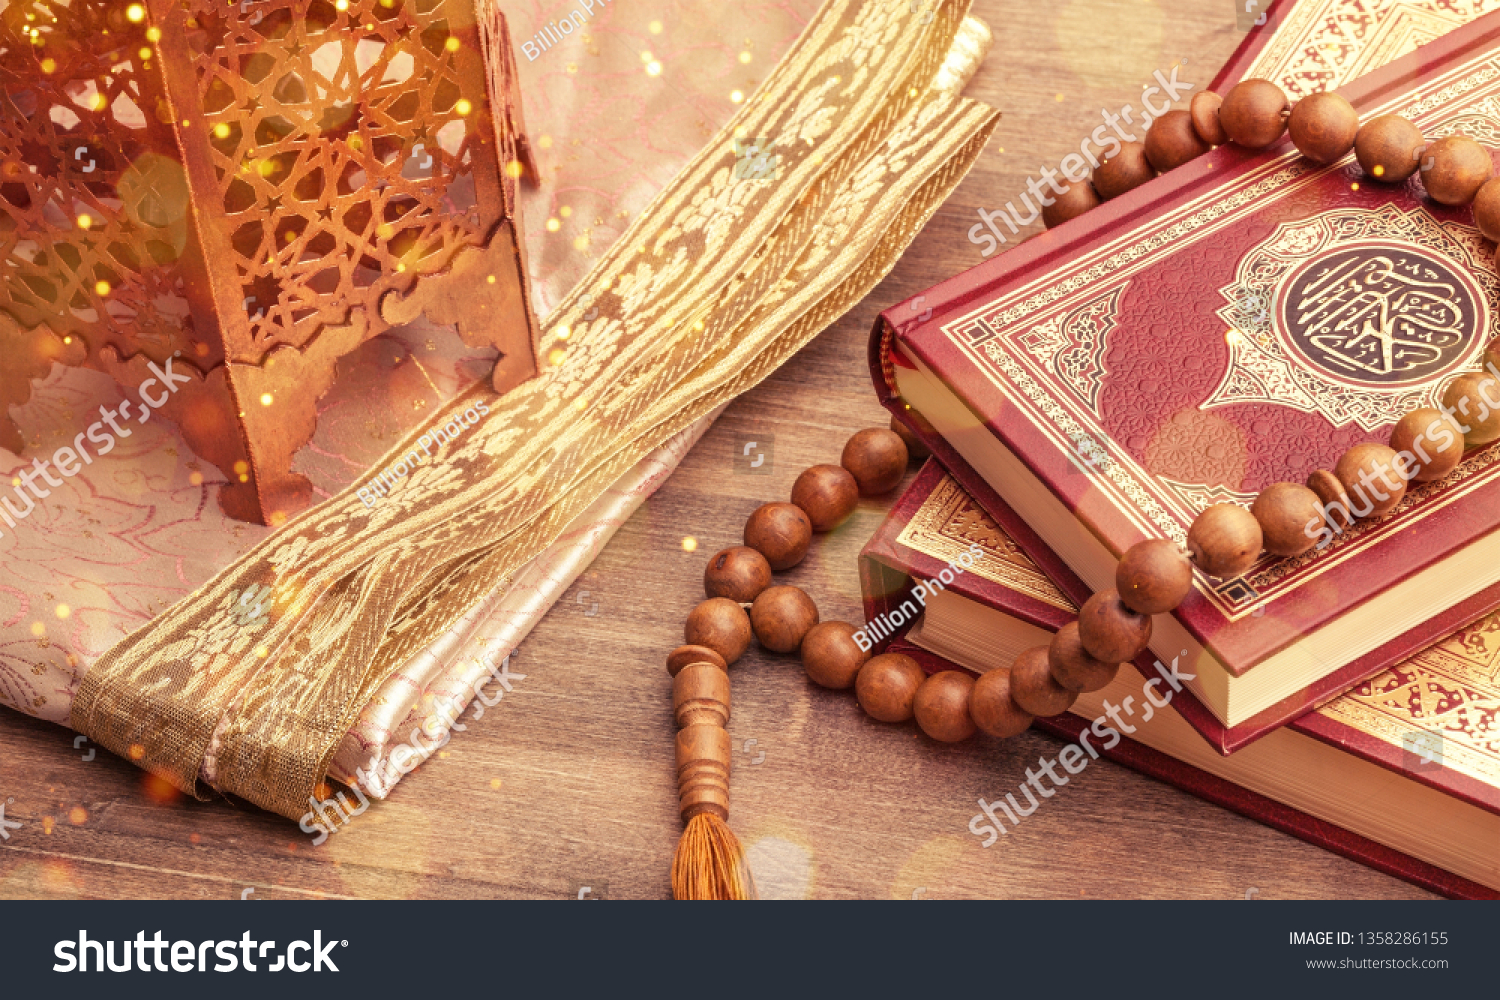 Ramadhan objects. Holy Quran and wooden cheekbones #1358286155